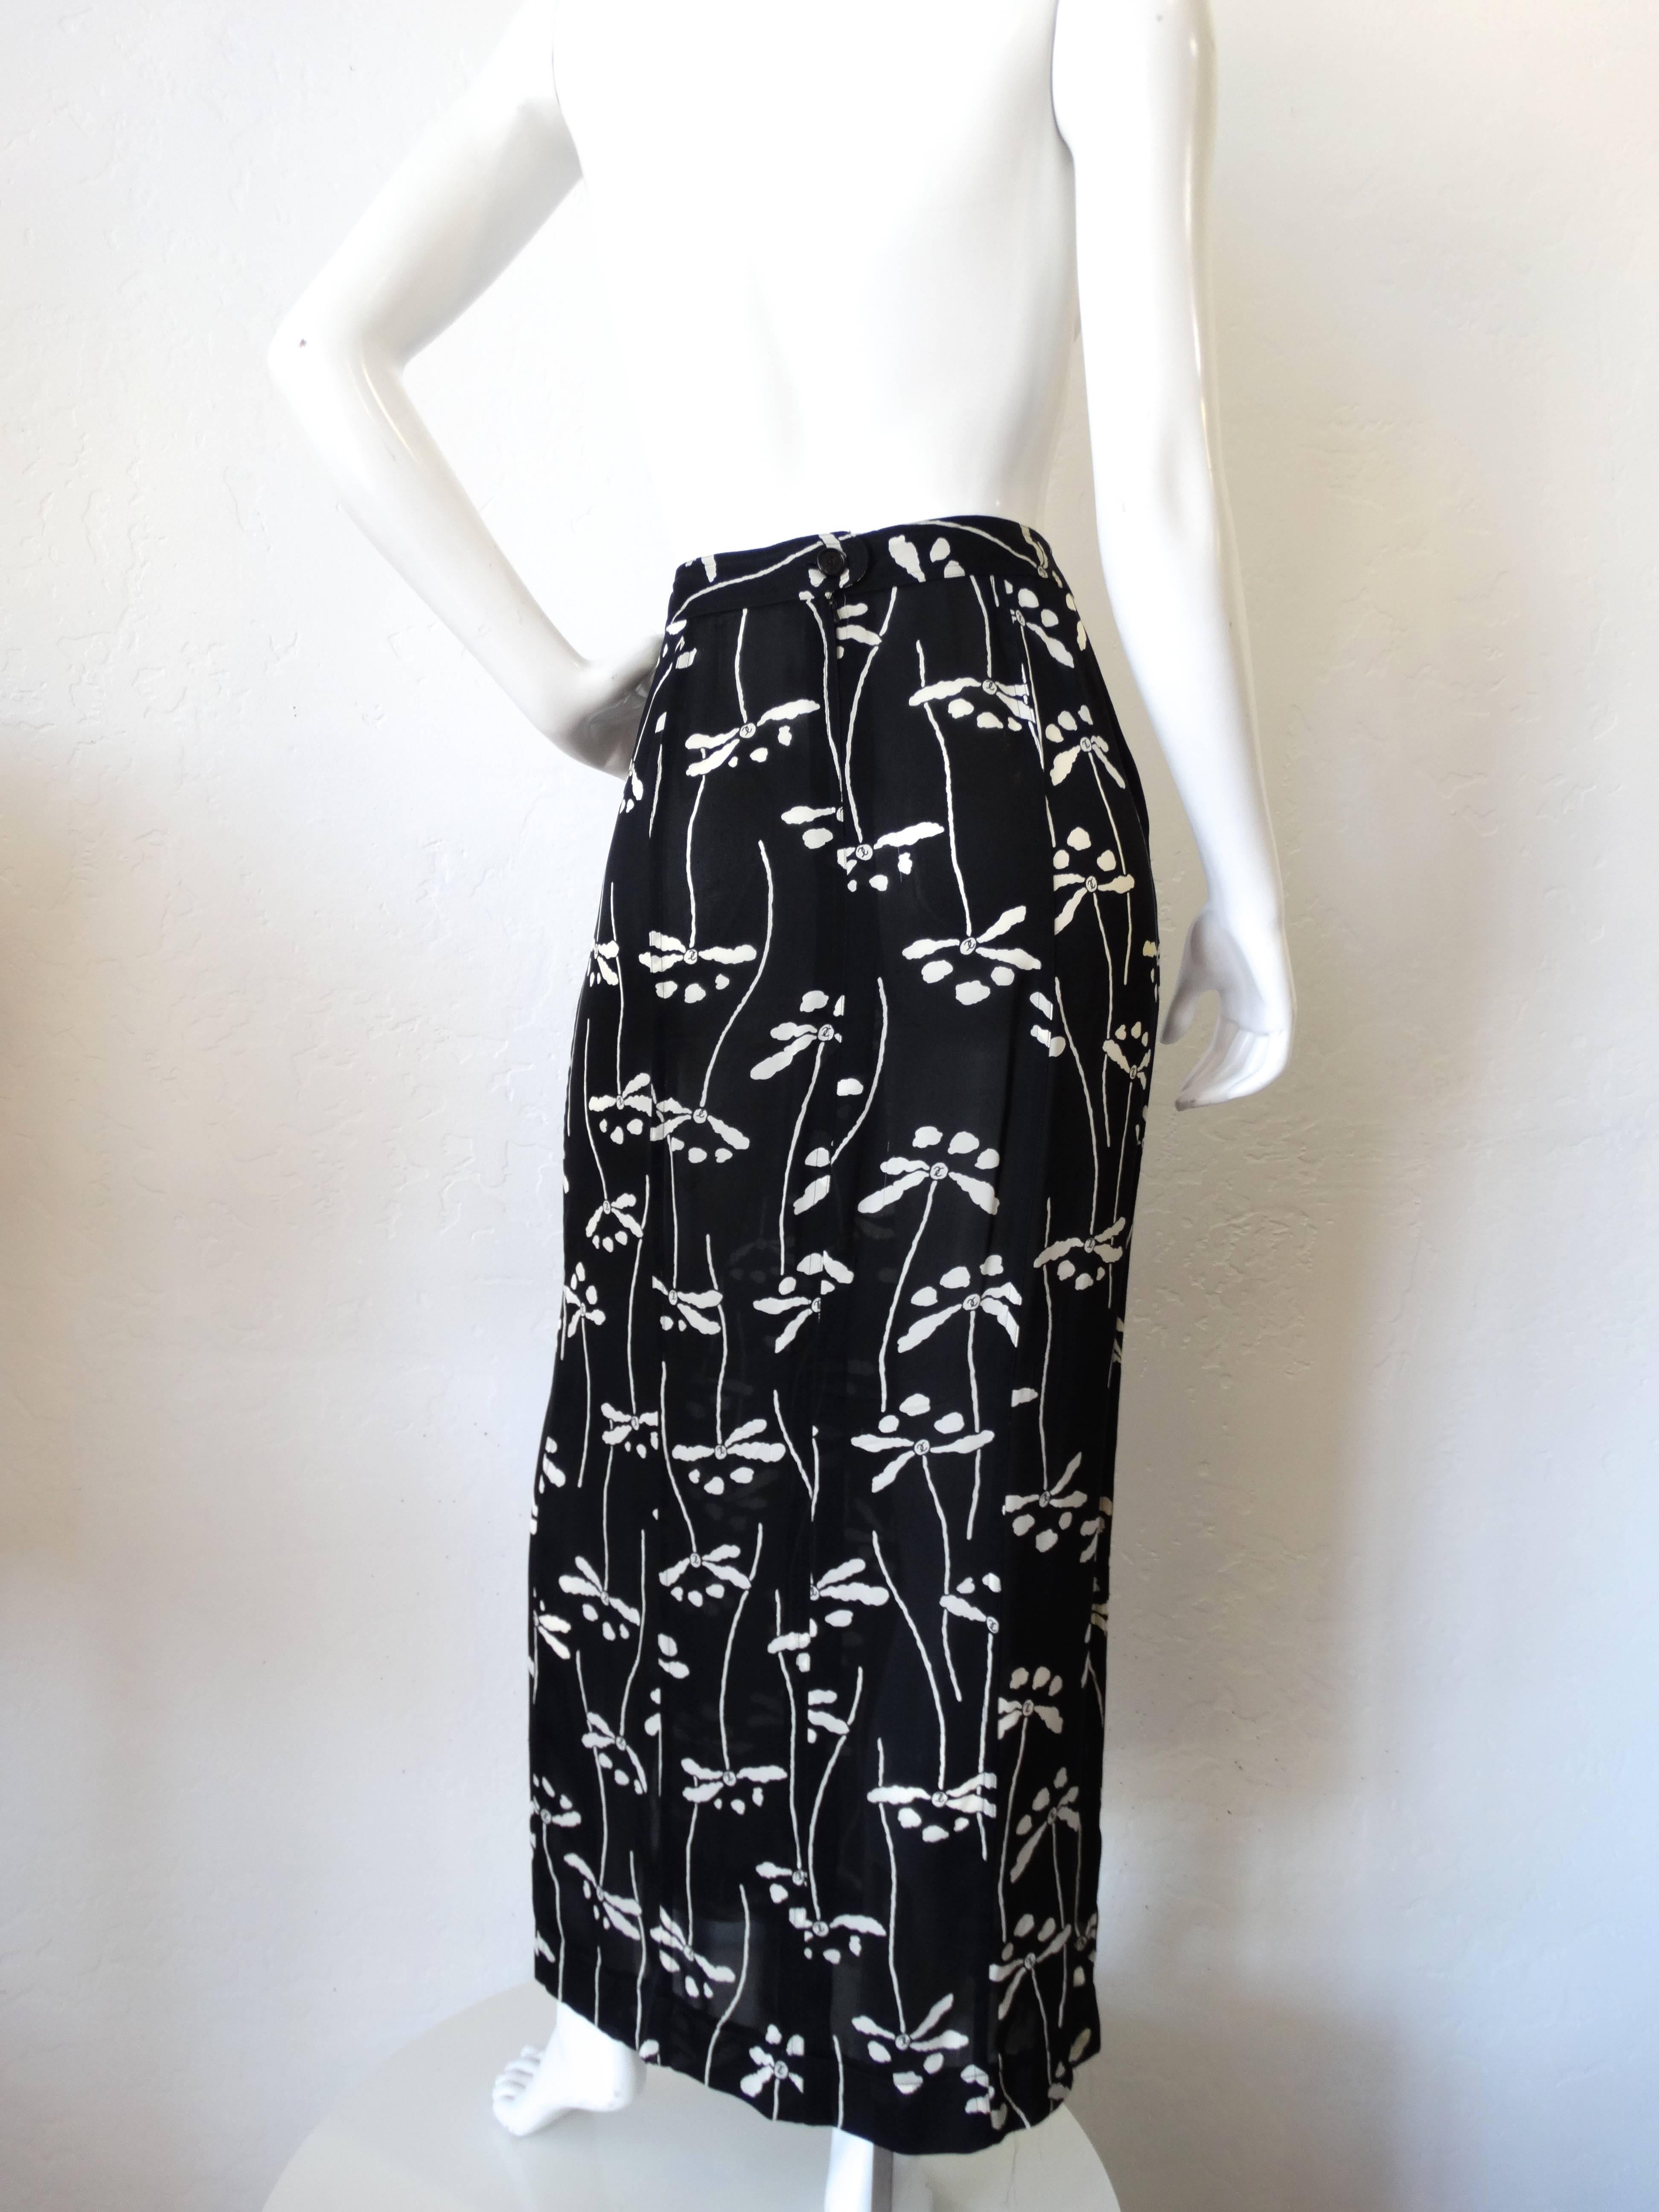 Incredible 1990s Chanel Floral Skirt! Fitted waist with a pencil skirt like fit, a knee length slit along the left leg. Adorable black and white floral print accented with CC logos on the inside on 100% silk fabric. Zips and buttons up the back.